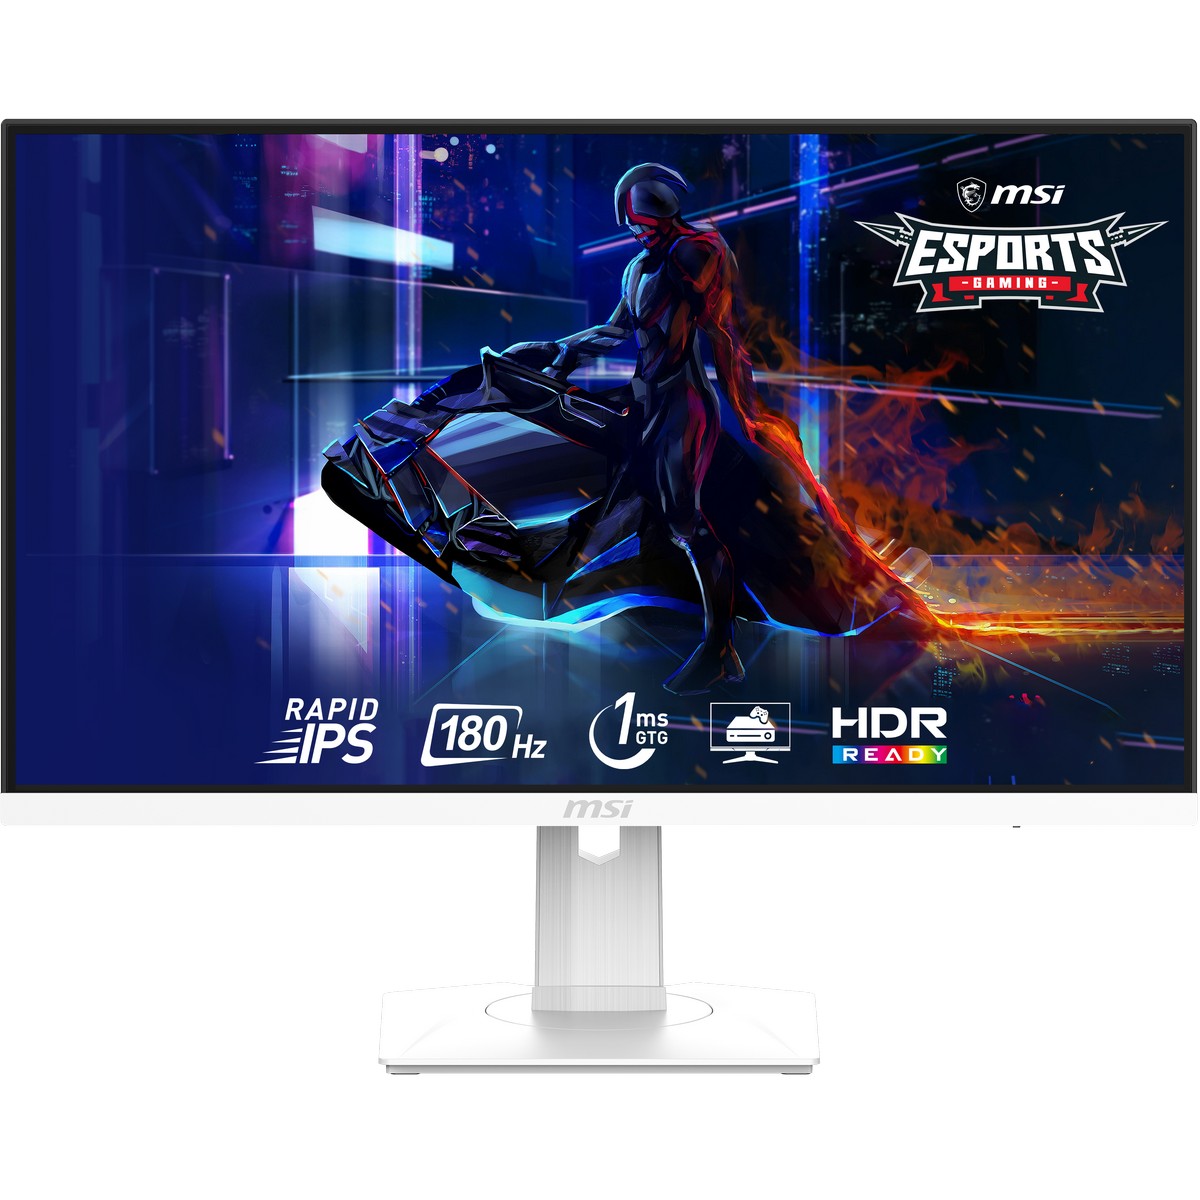 MSI 27" MAG 274PFW 1920x1080 Rapid IPS 180Hz 1ms A-Sync Widescreen Gaming Monitor